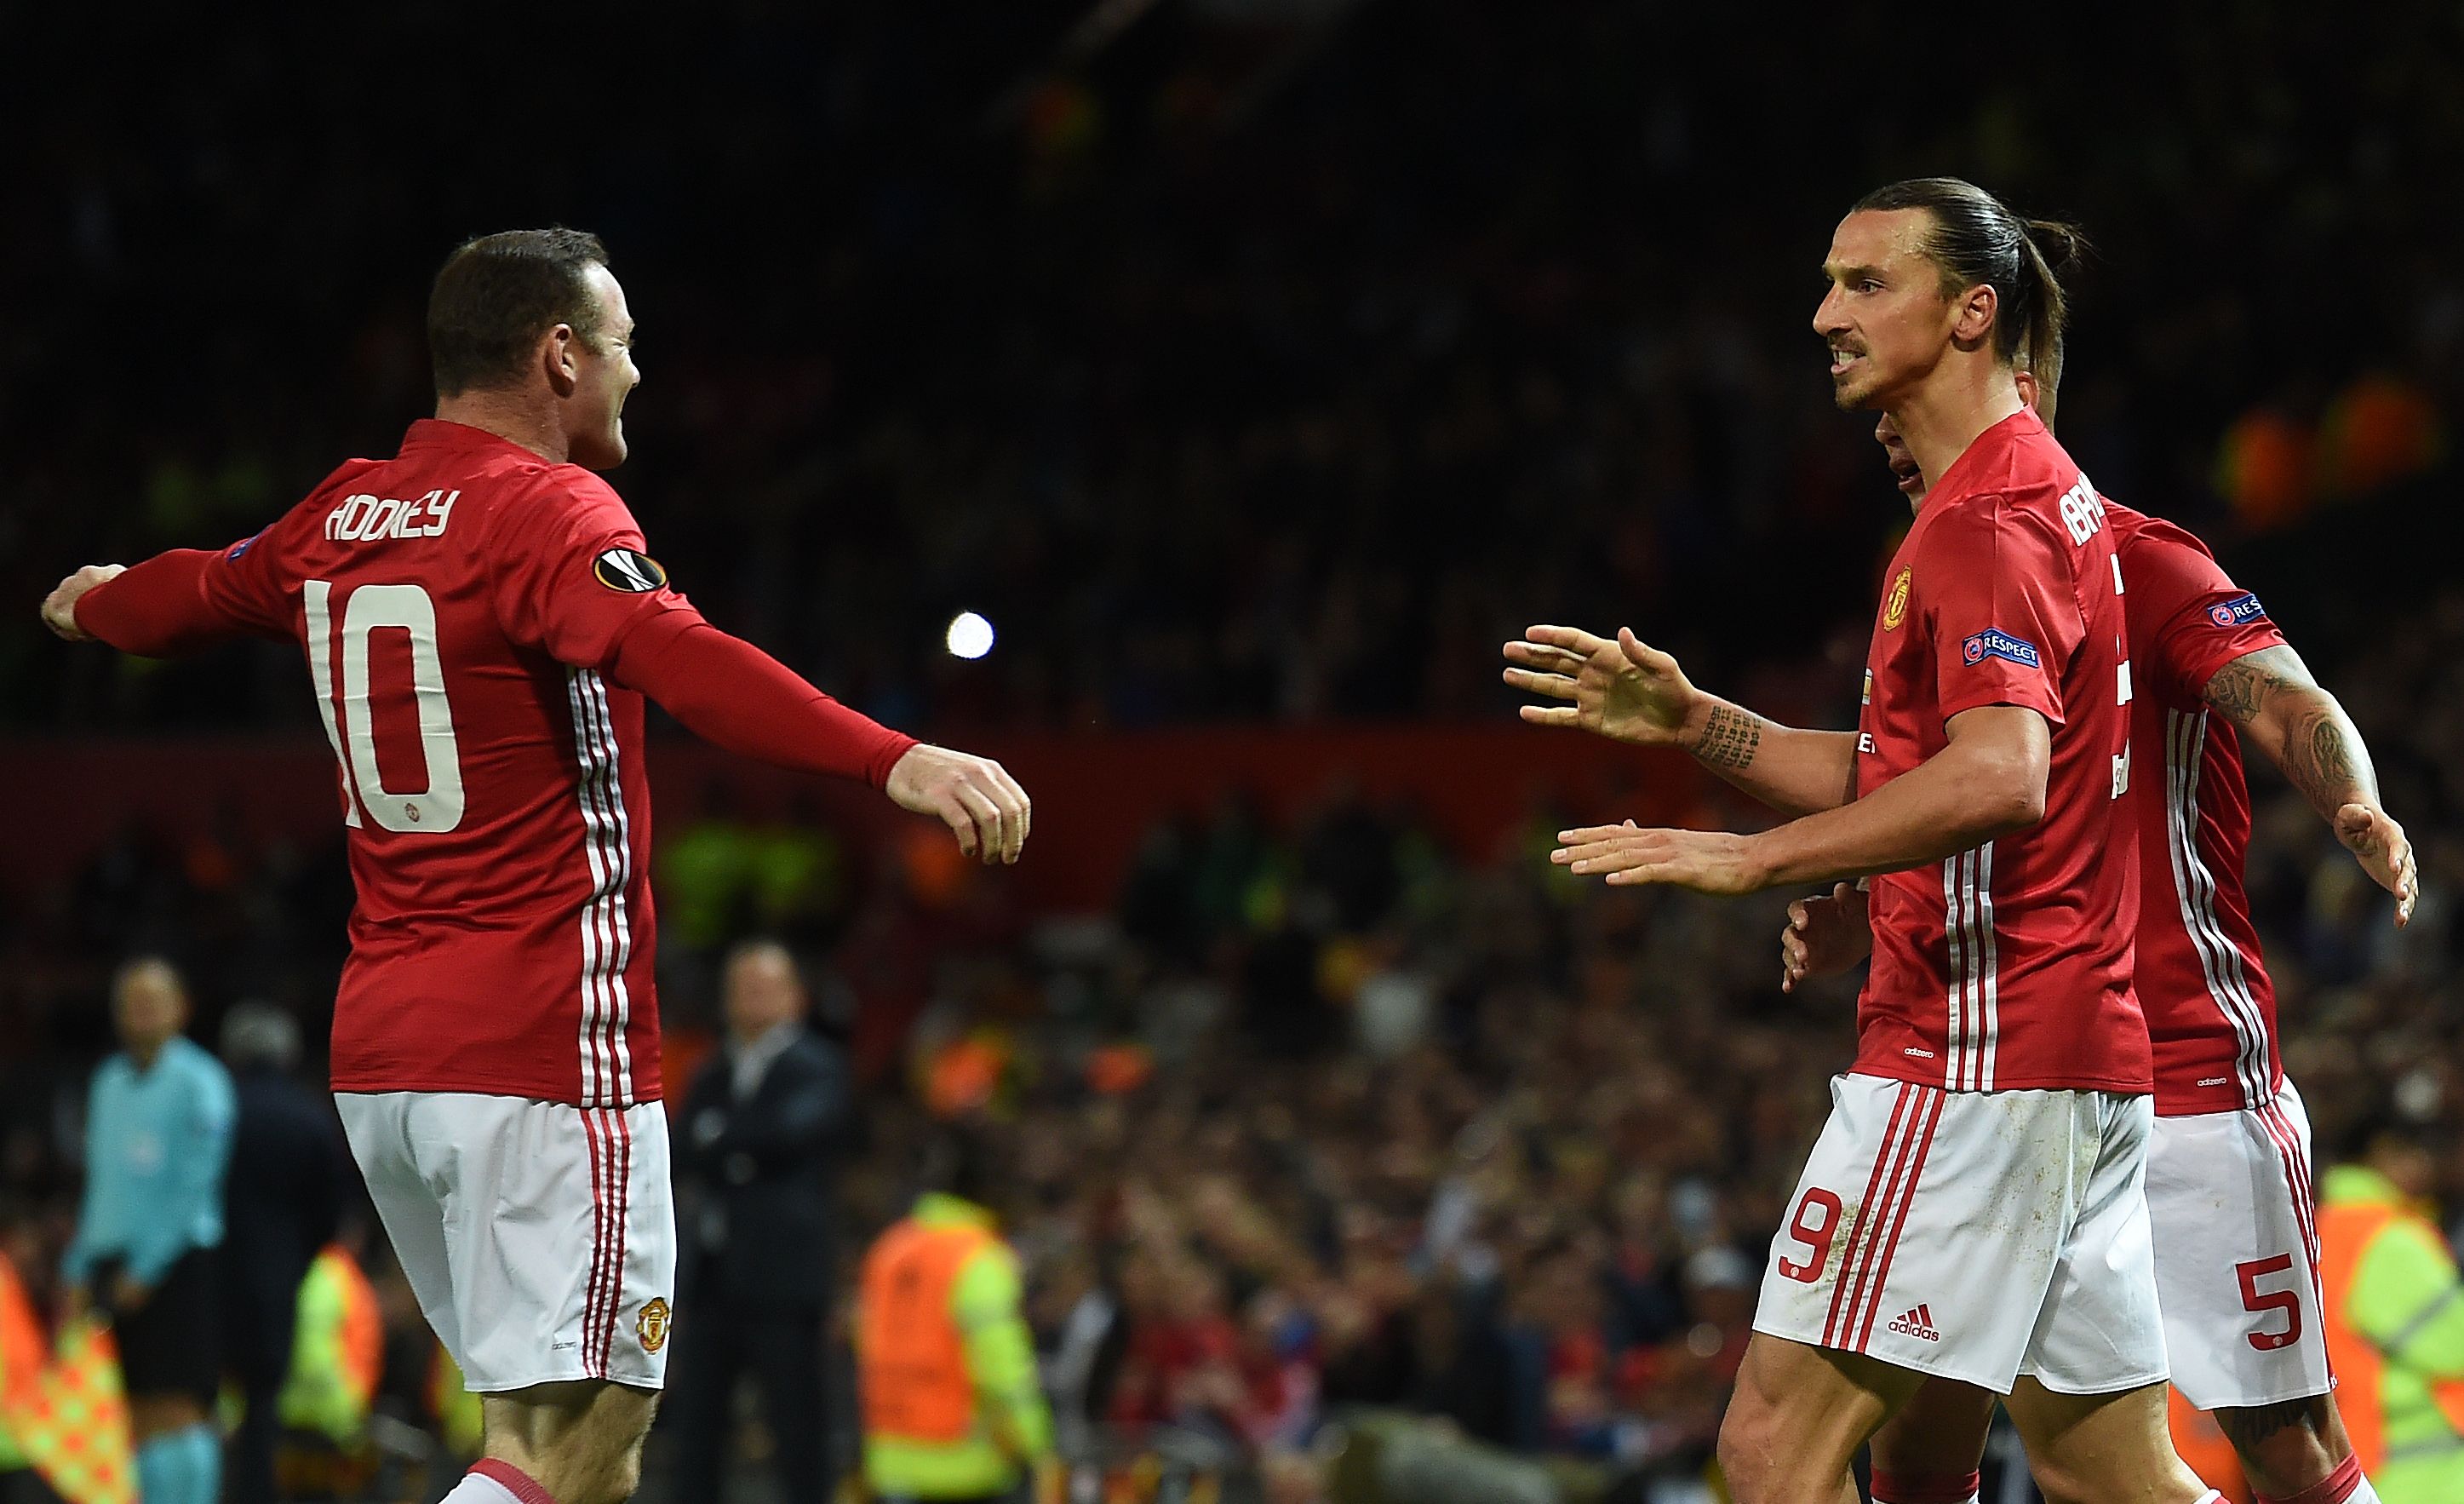 Manchester United's Swedish striker Zlatan Ibrahimovic (R) celebrates scoring his team's first goal with Manchester United's English striker Wayne Rooney (L) during the UEFA Europa League group A football match between Manchester United and Zorya Luhansk at Old Trafford stadium in Manchester, north-west England on September 29, 2016. / AFP / PAUL ELLIS        (Photo credit should read PAUL ELLIS/AFP/Getty Images)